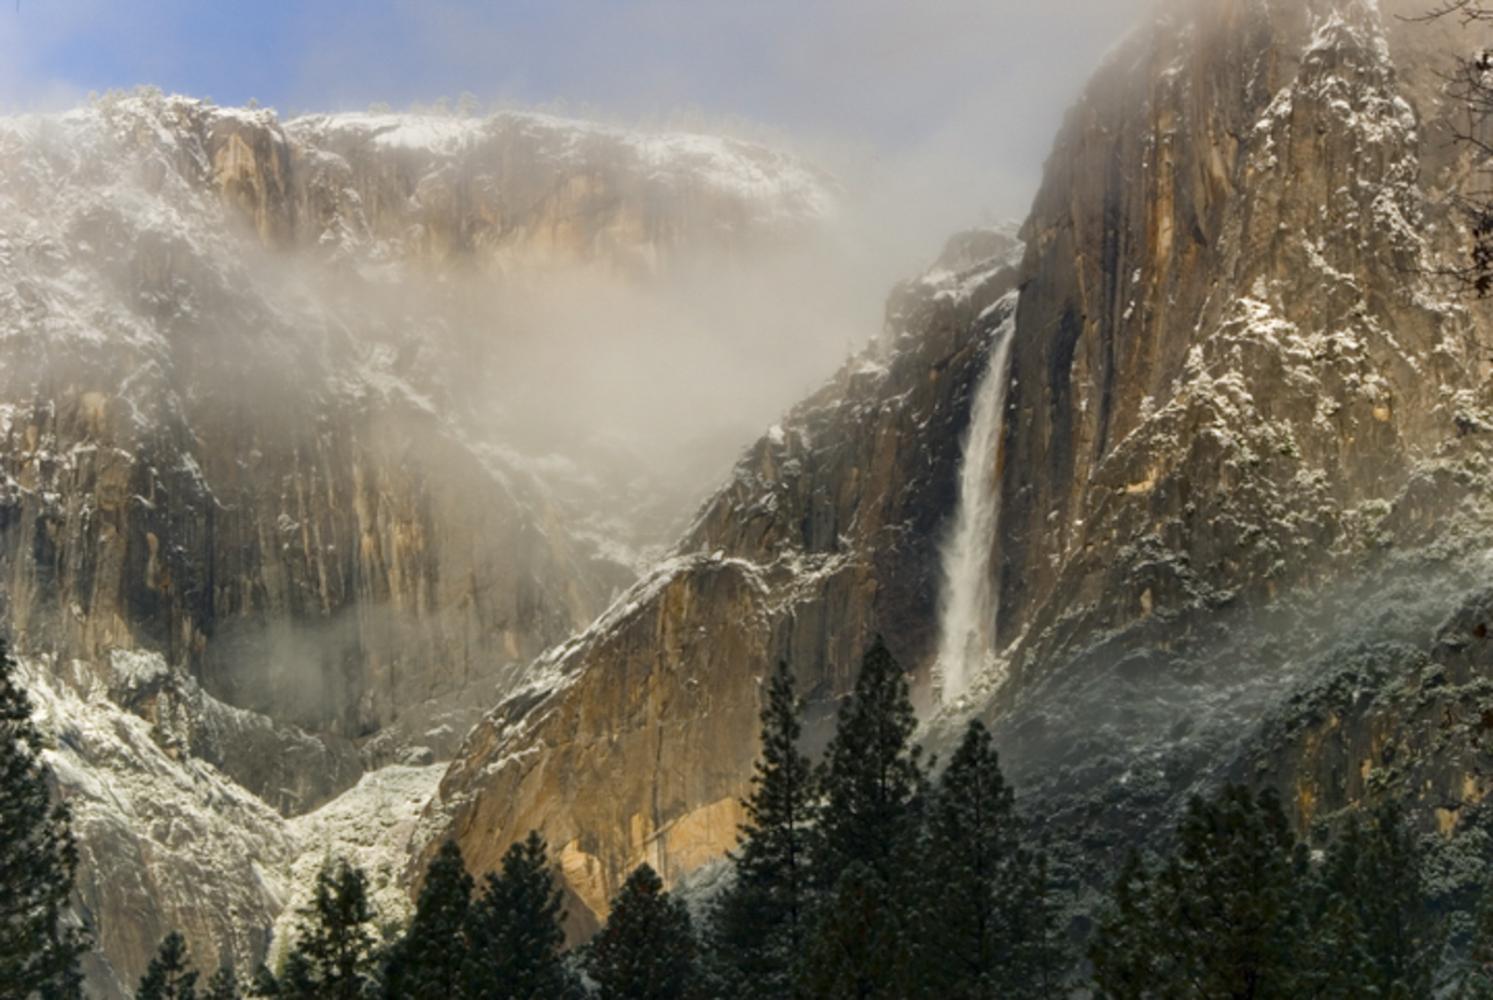 The first snow of winter in the valley of Yosemite National Park, California.